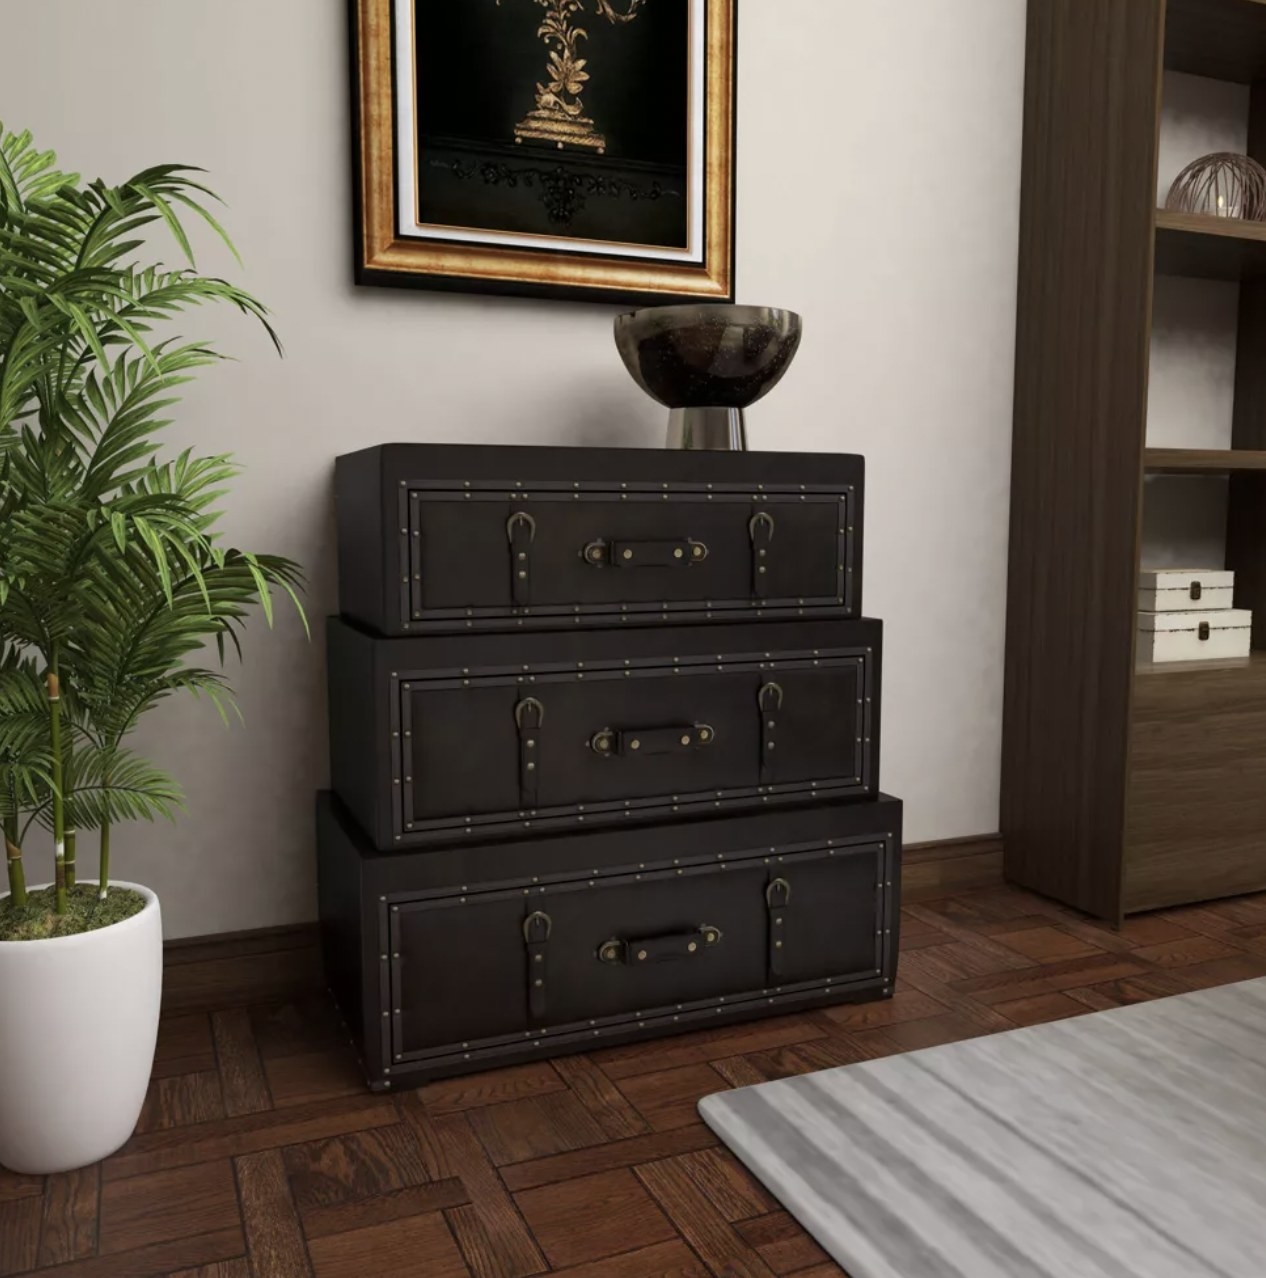 the trunk dresser in room with decorative bowl on top